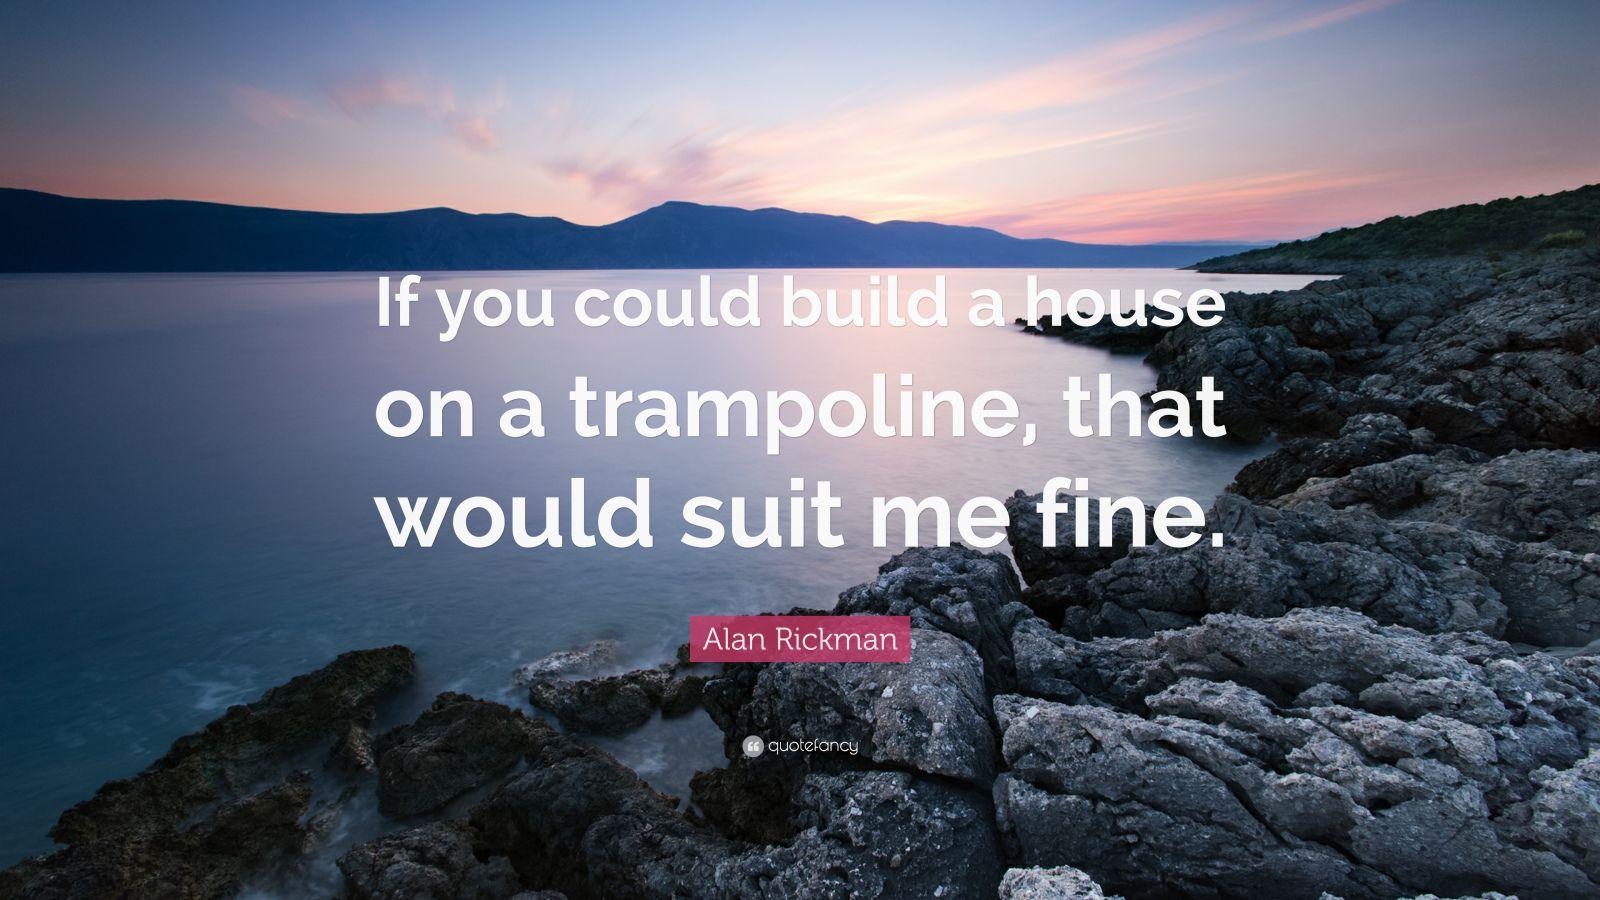 Alan Rickman Quote: “If you could build a house on a trampoline